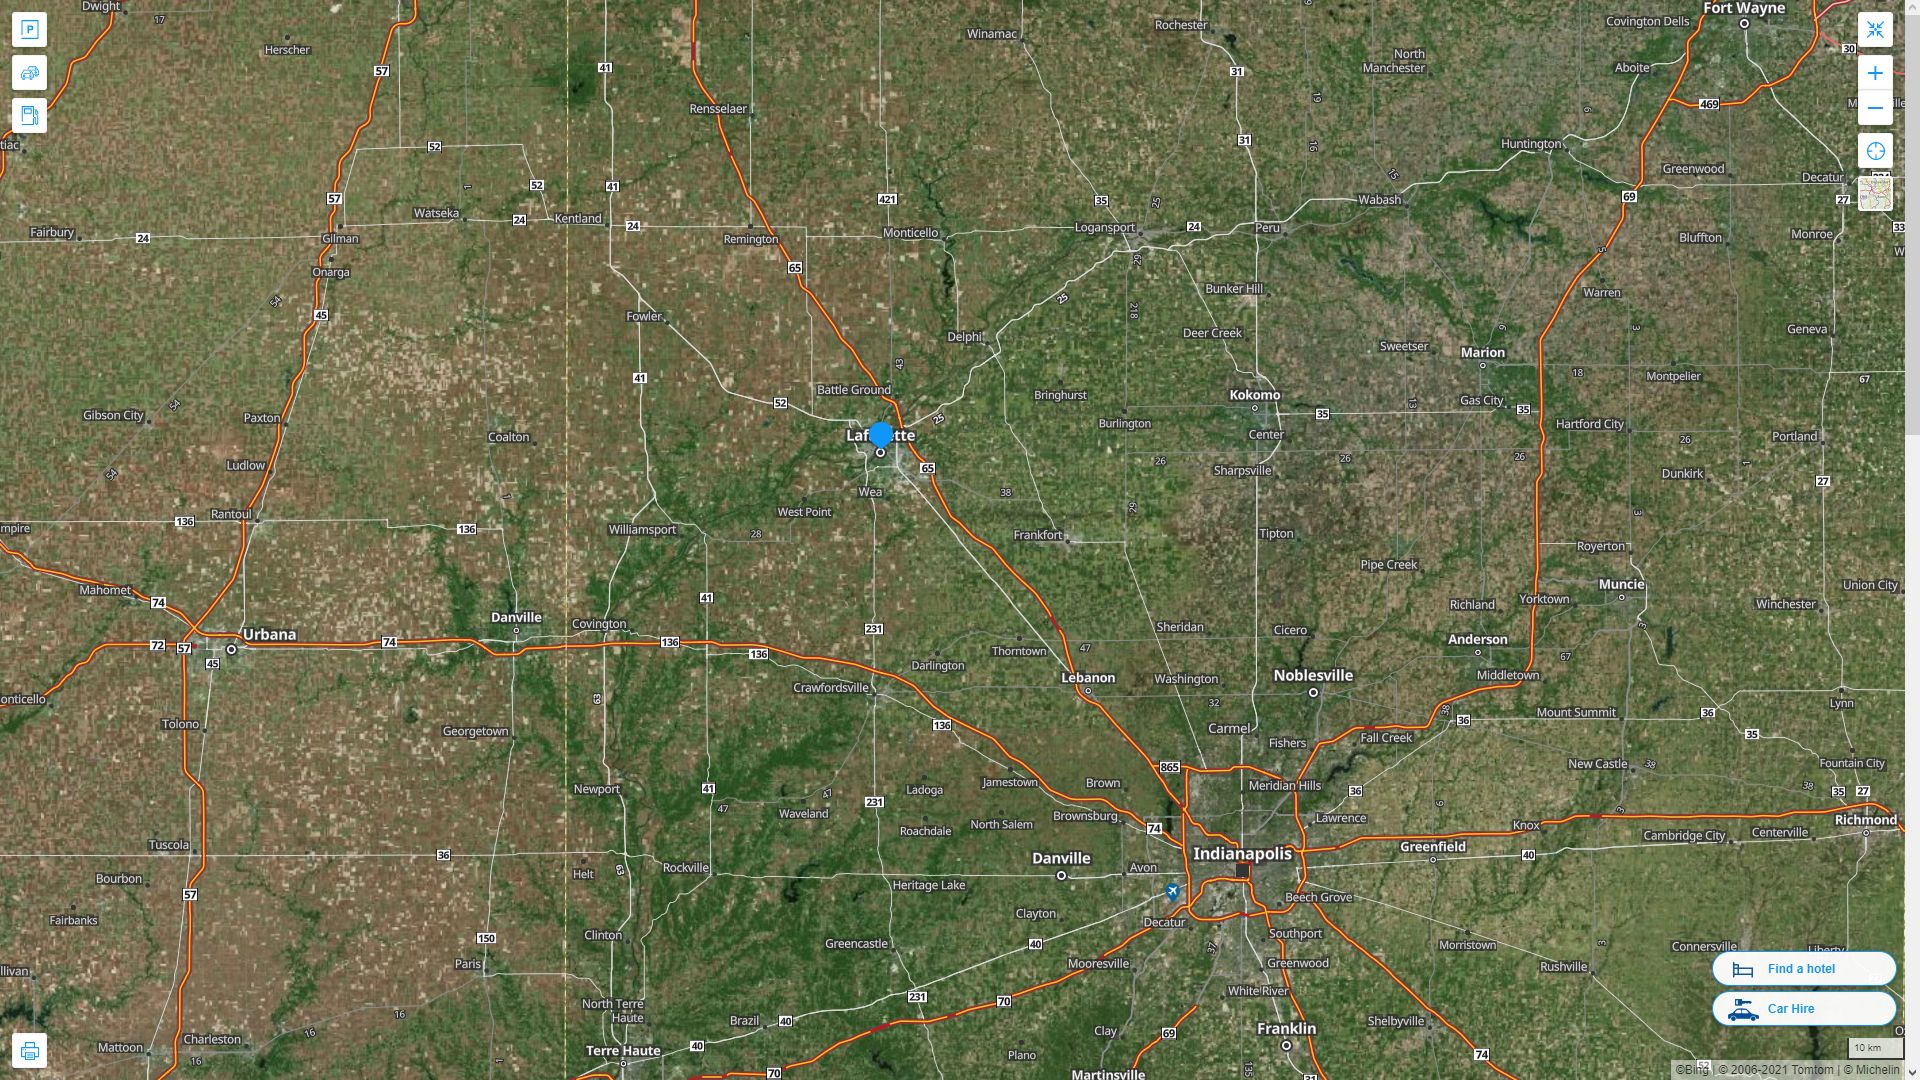 Lafayette Indiana Highway and Road Map with Satellite View